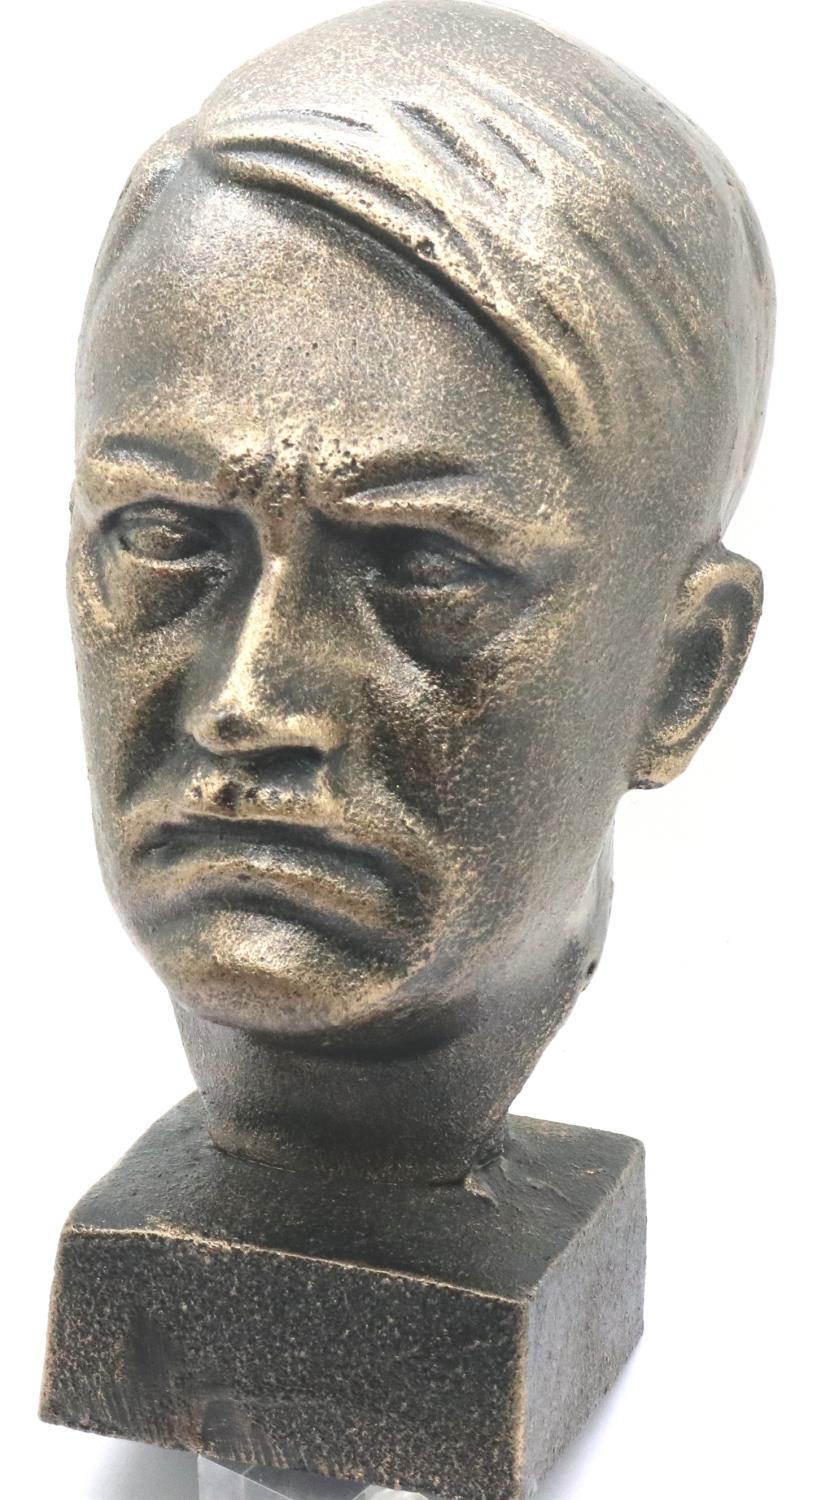 Bronzed cast iron bust of Adolf Hitler, H: 22 cm. P&P Group 2 (£18+VAT for the first lot and £3+